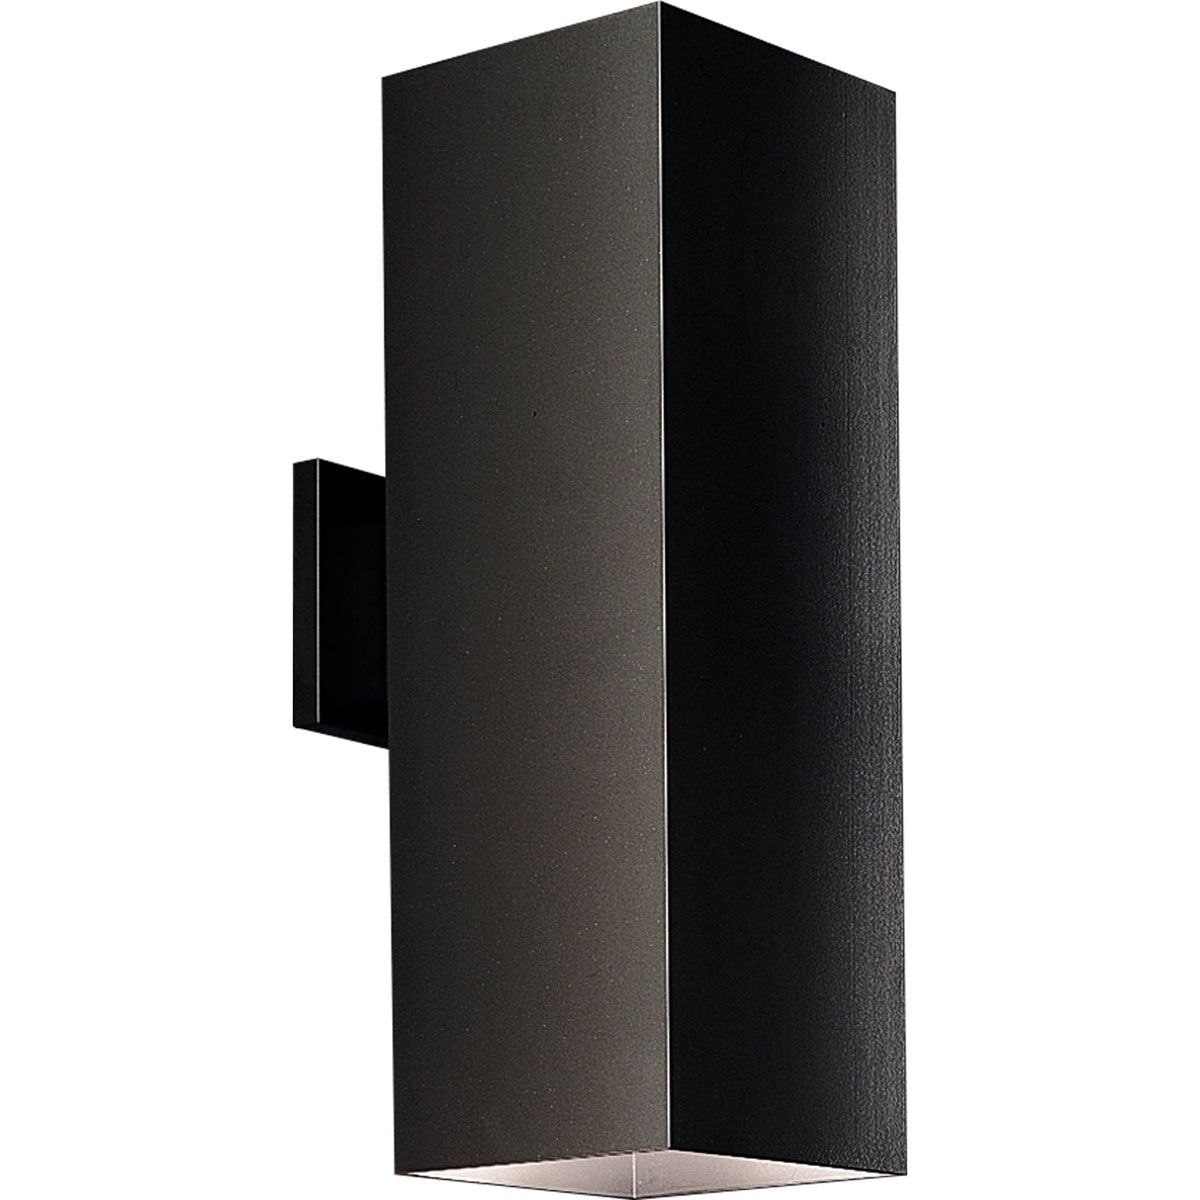 Down Square Outdoor Wall Lightprogress Lighting | P5644 31 With Regard To Outdoor Wall Sconce Up Down Lighting (Photo 12 of 15)